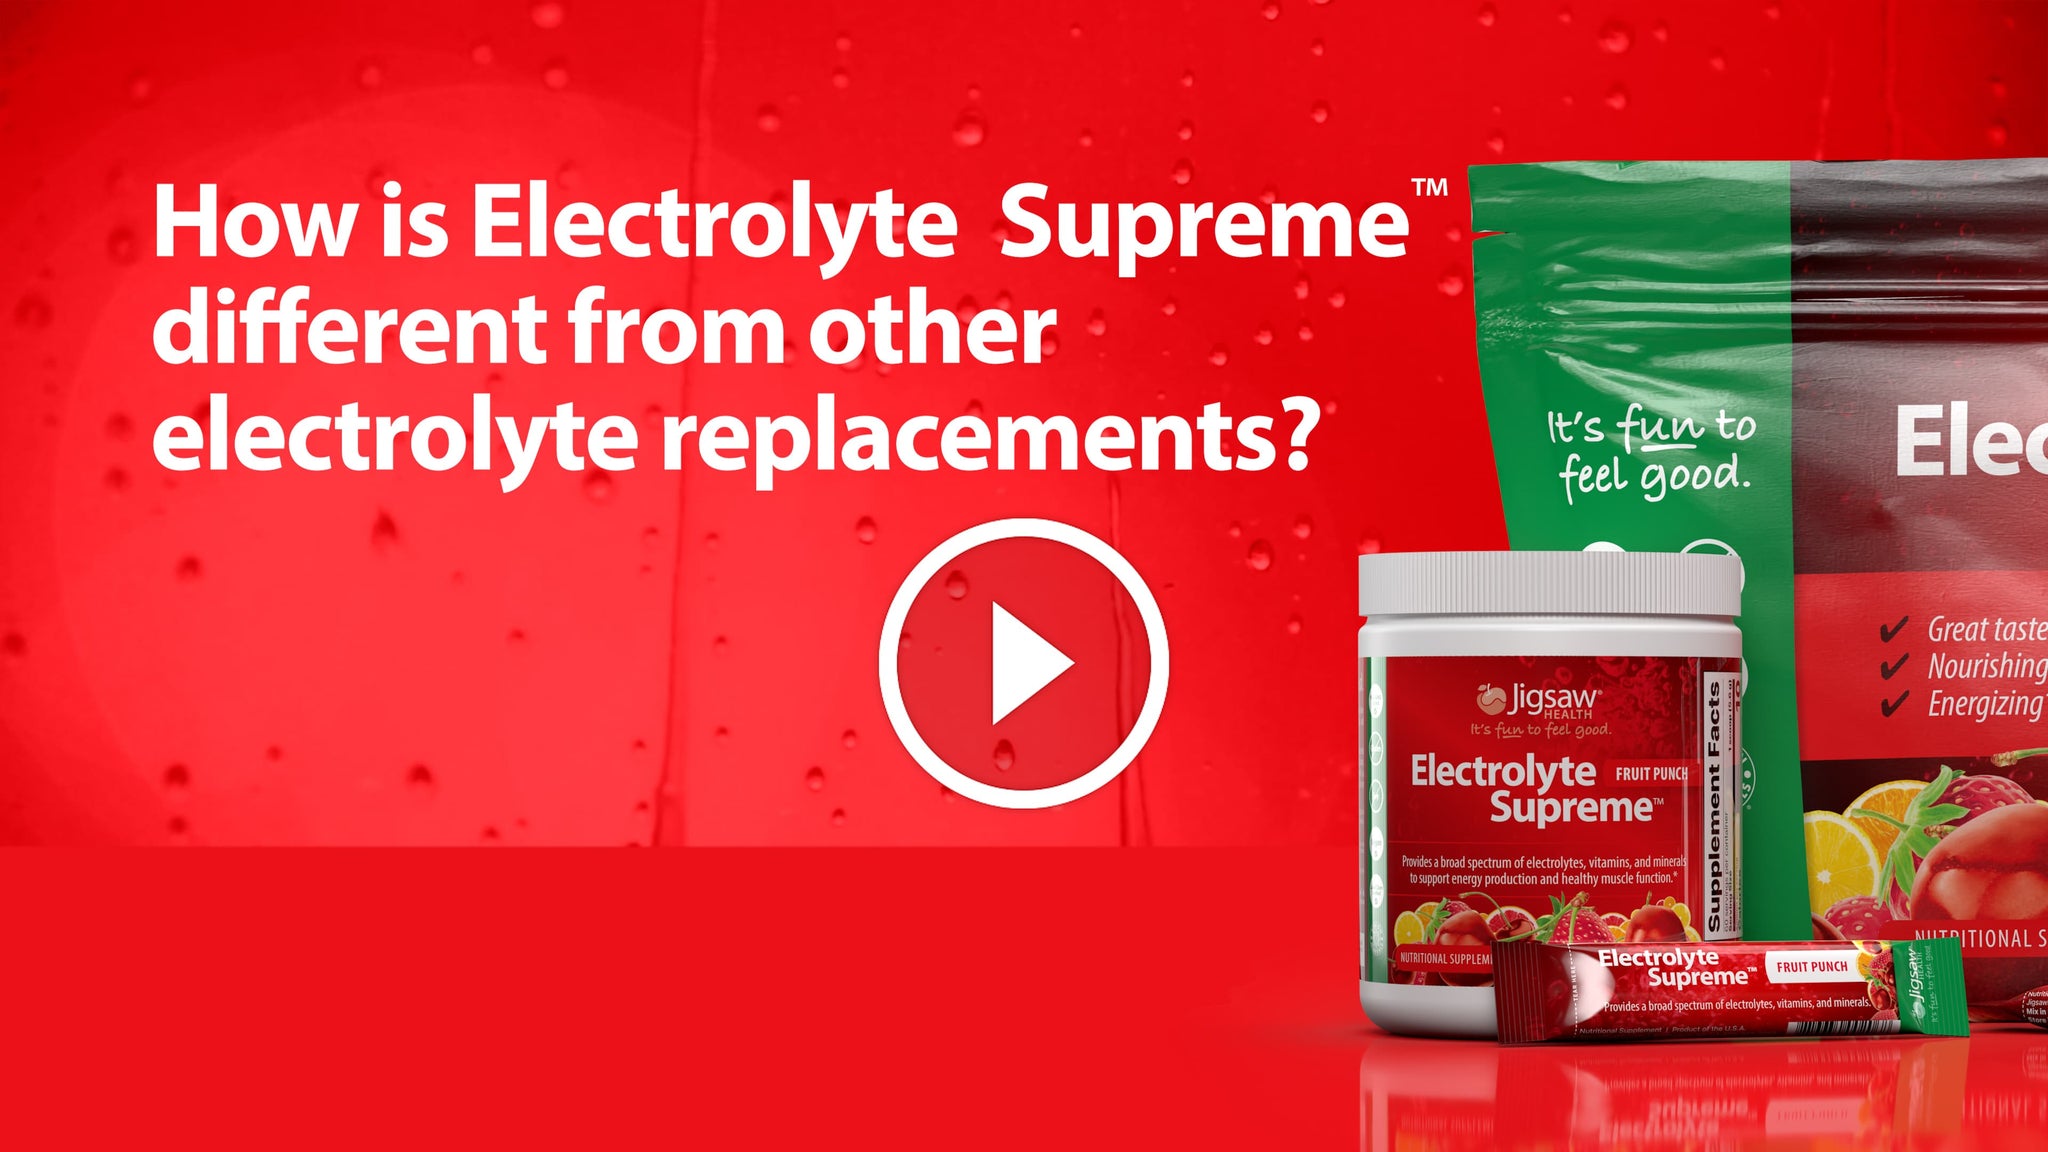 How is Electrolyte Supreme different from other Electrolyte Replacements?